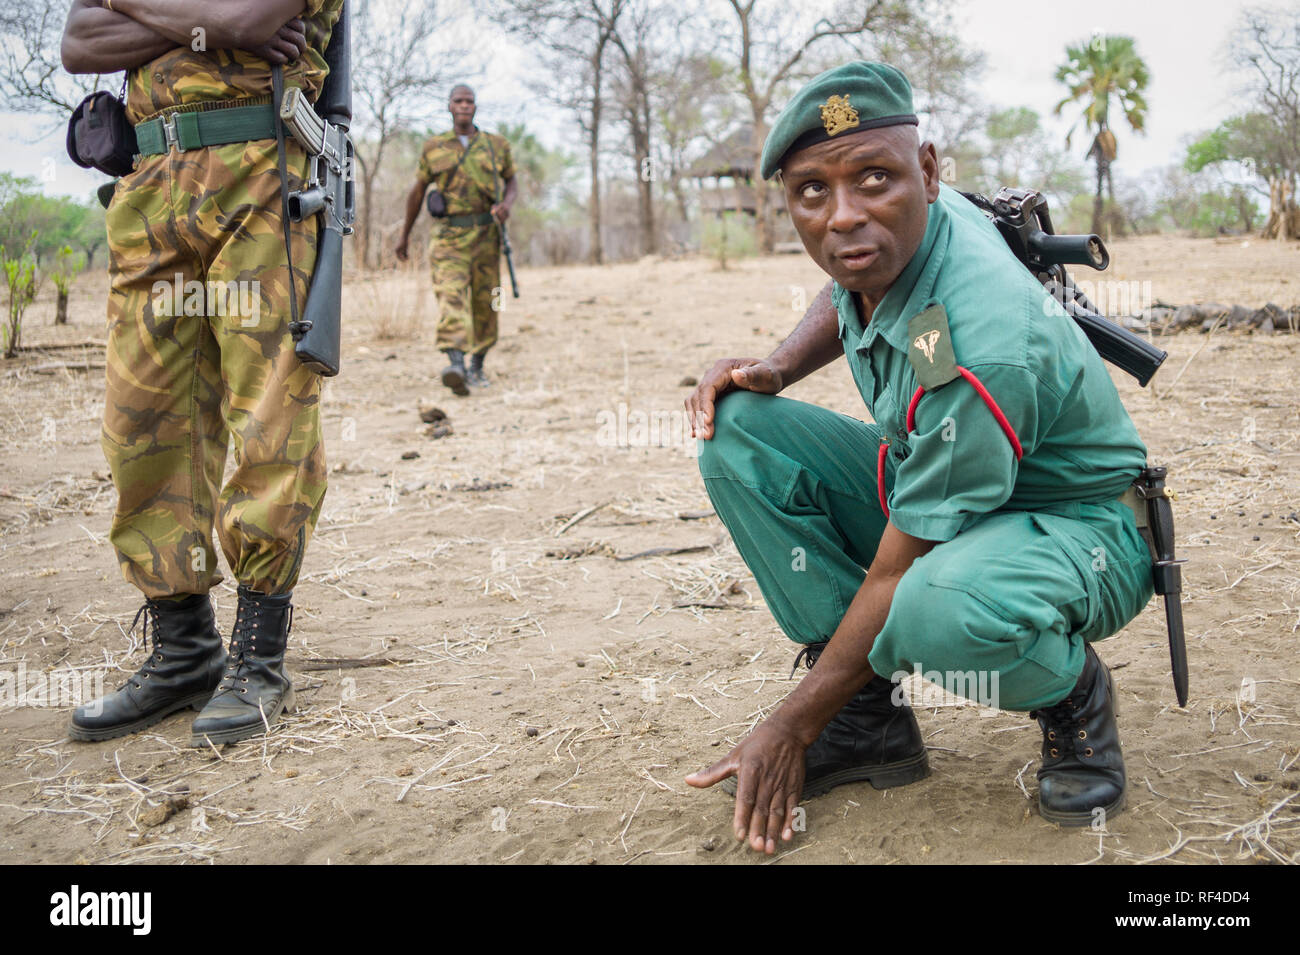 Rangers or scouts from Majete Wildlife Reserve's law enforcement team conduct field exercises to track wildlife and protect black rhino from poaching Stock Photo